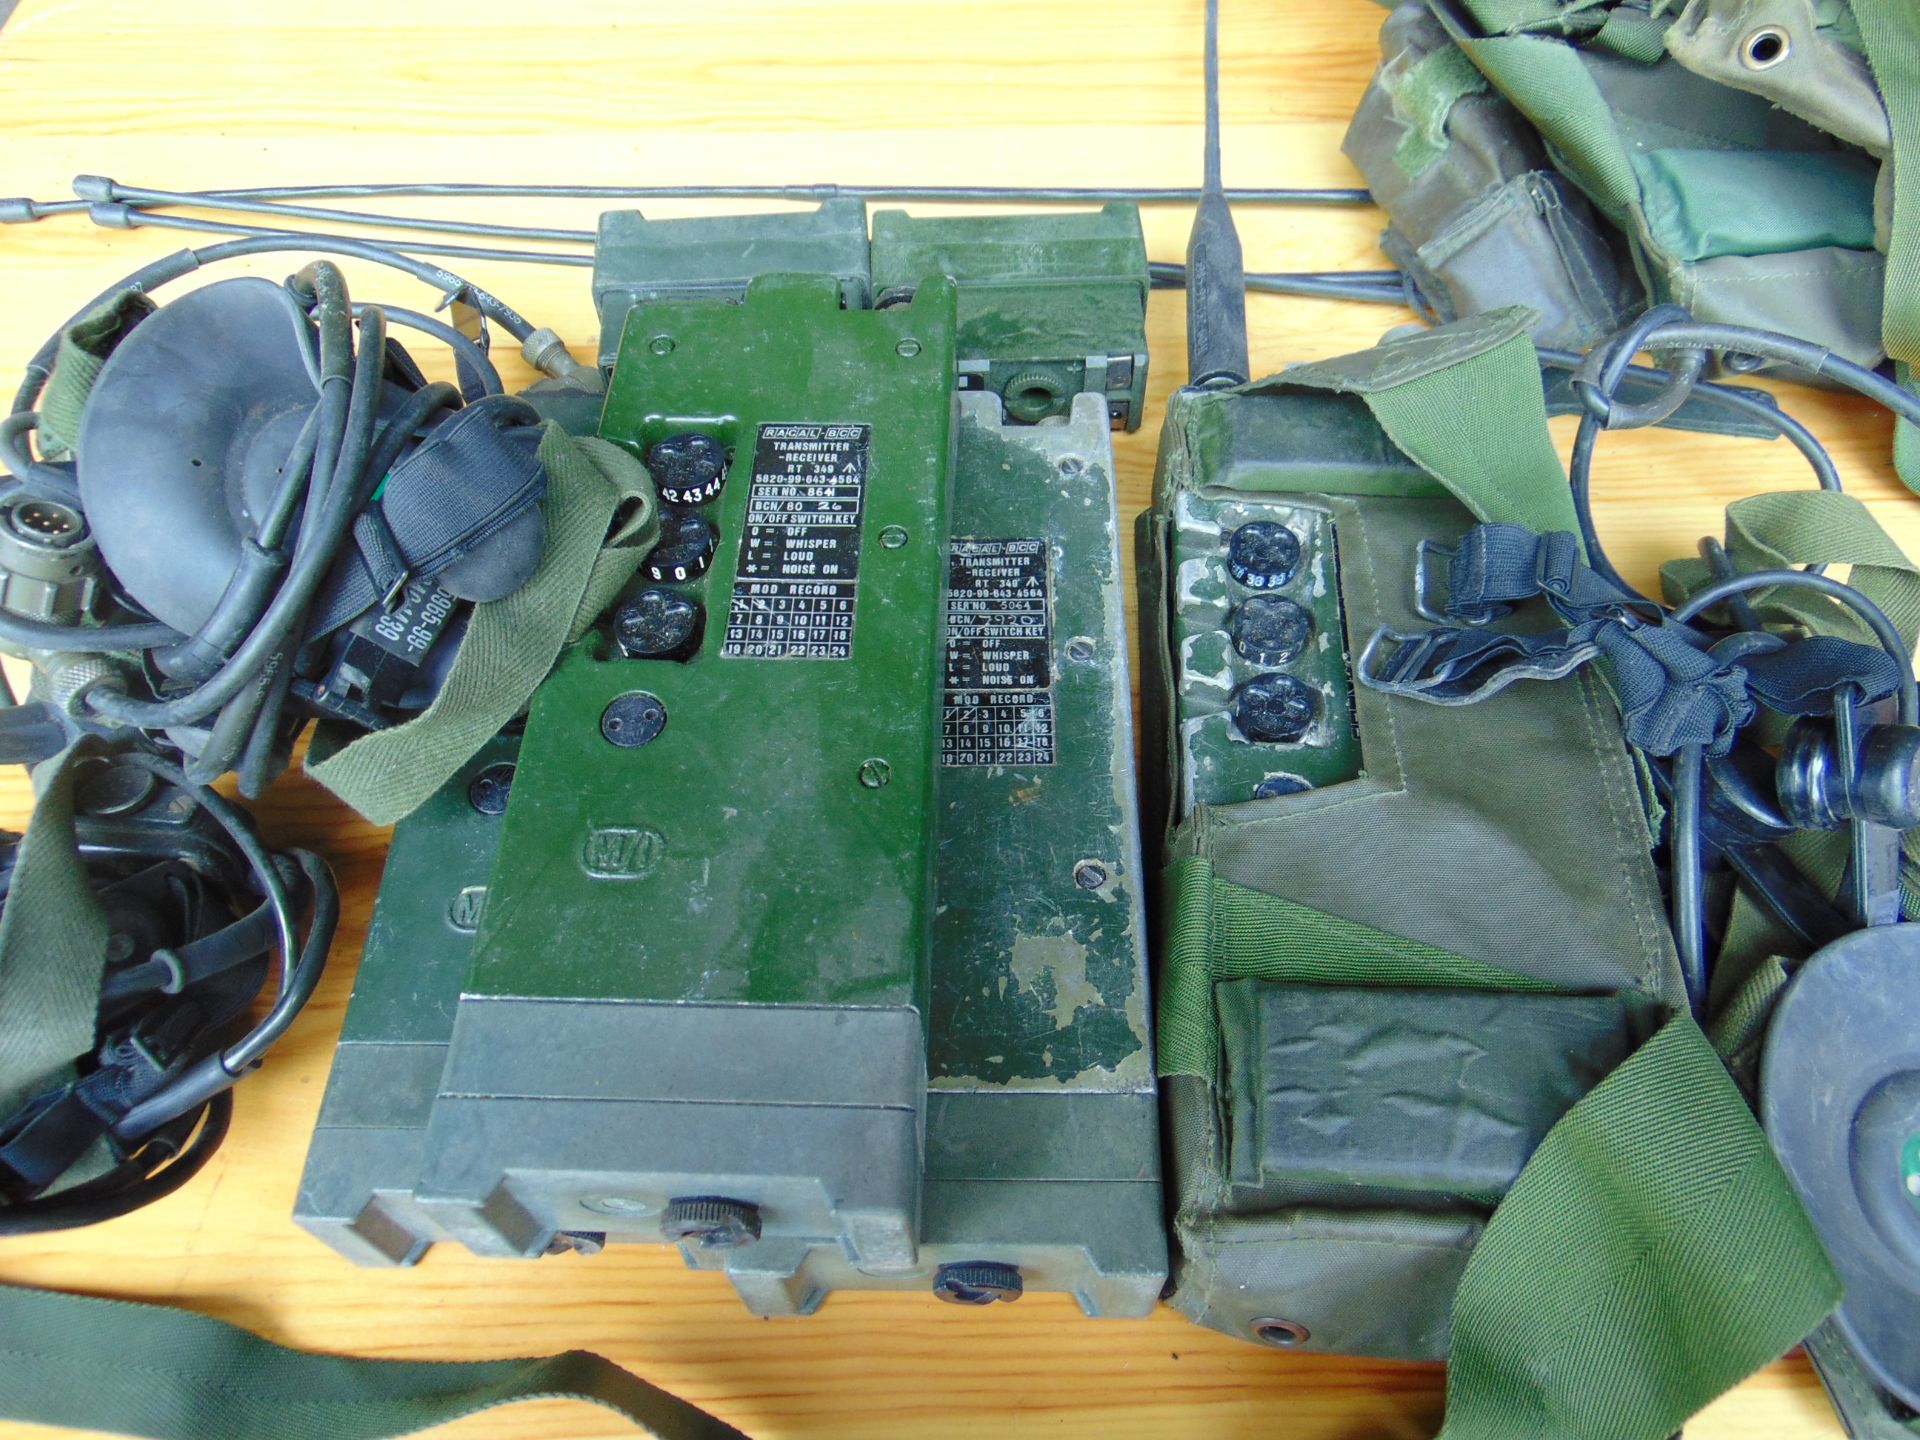 4x Clansman RT 349 Transmitter Receiver c/w Headsets, Battery Packs, Antenna and Pouch - Image 3 of 4